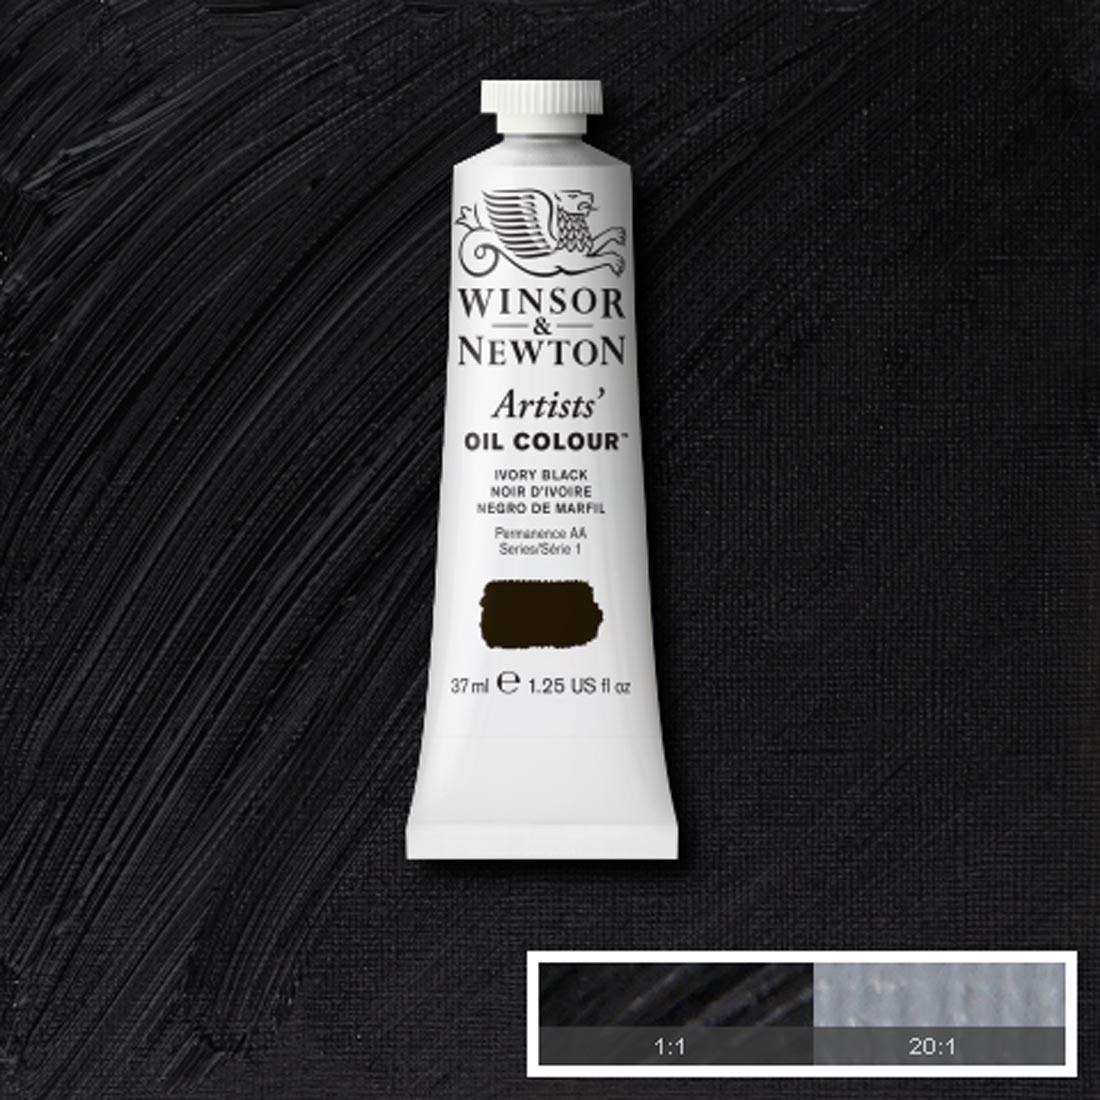 Tube of Ivory Black Winsor & Newton Artists' Oil Colour with a paint swatch for the background